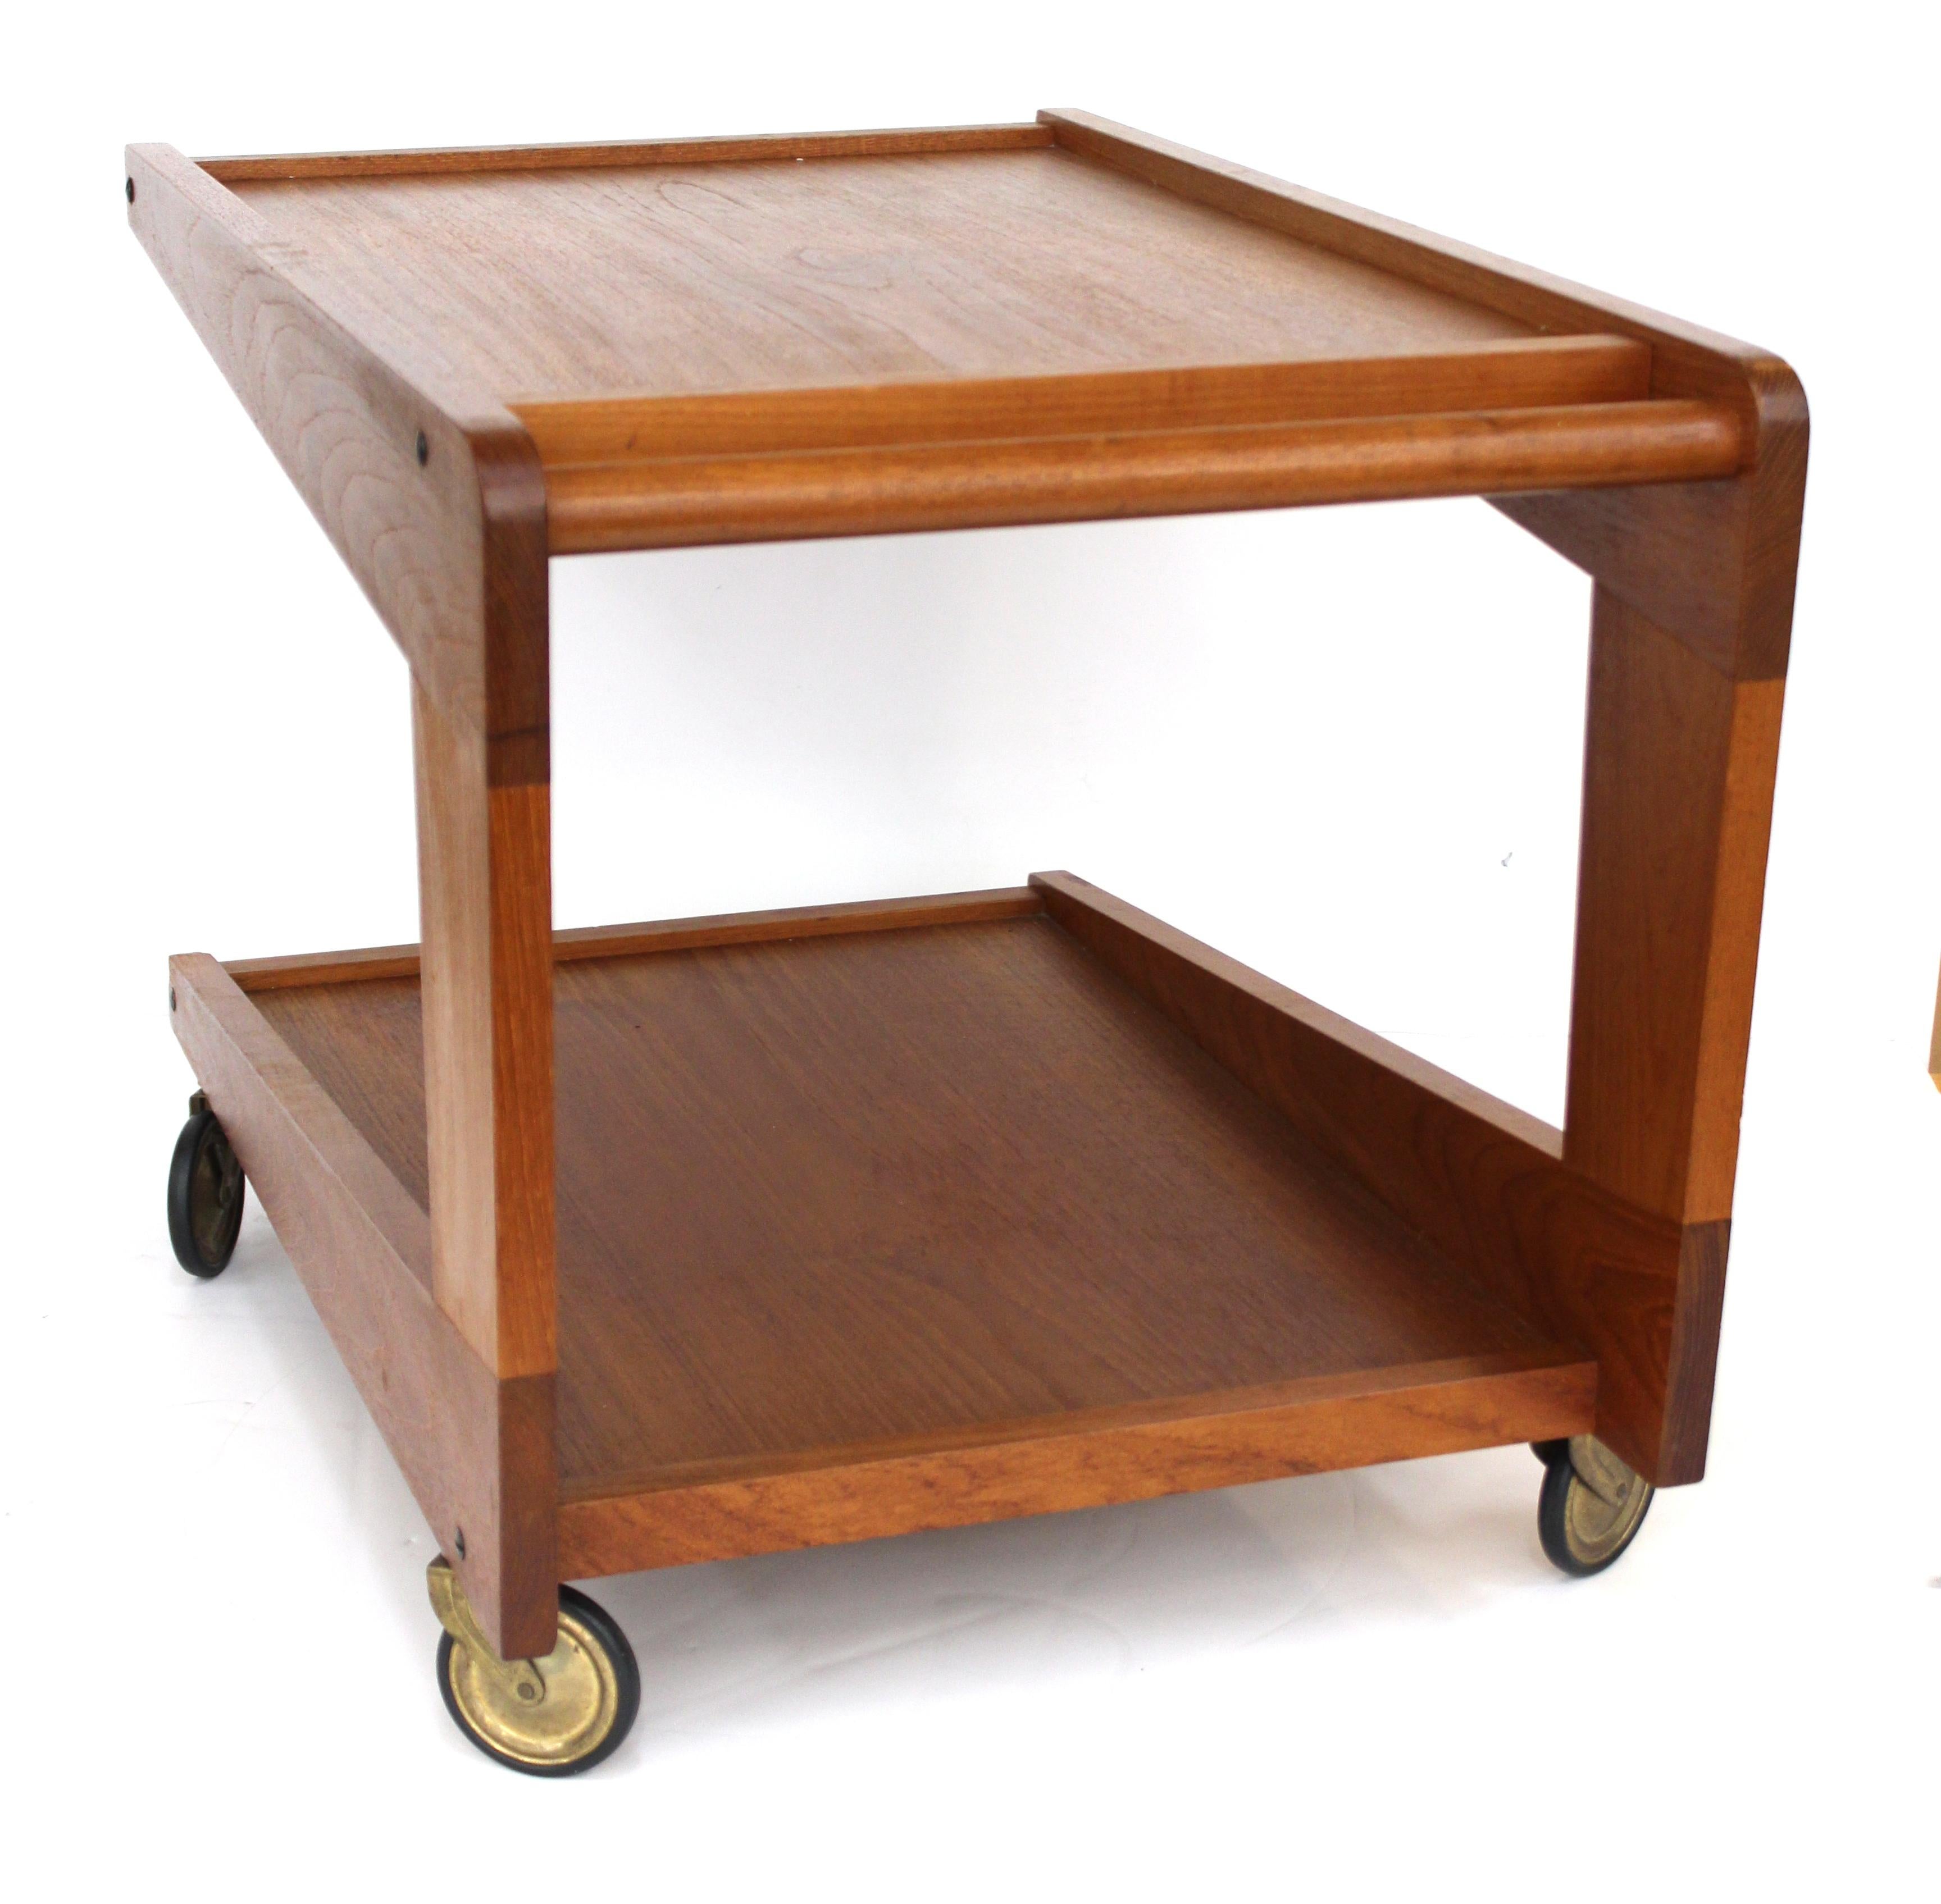 Mid-20th Century Mid-Century Modern Diminutive Wood Serving Cart or Side Table on Casters